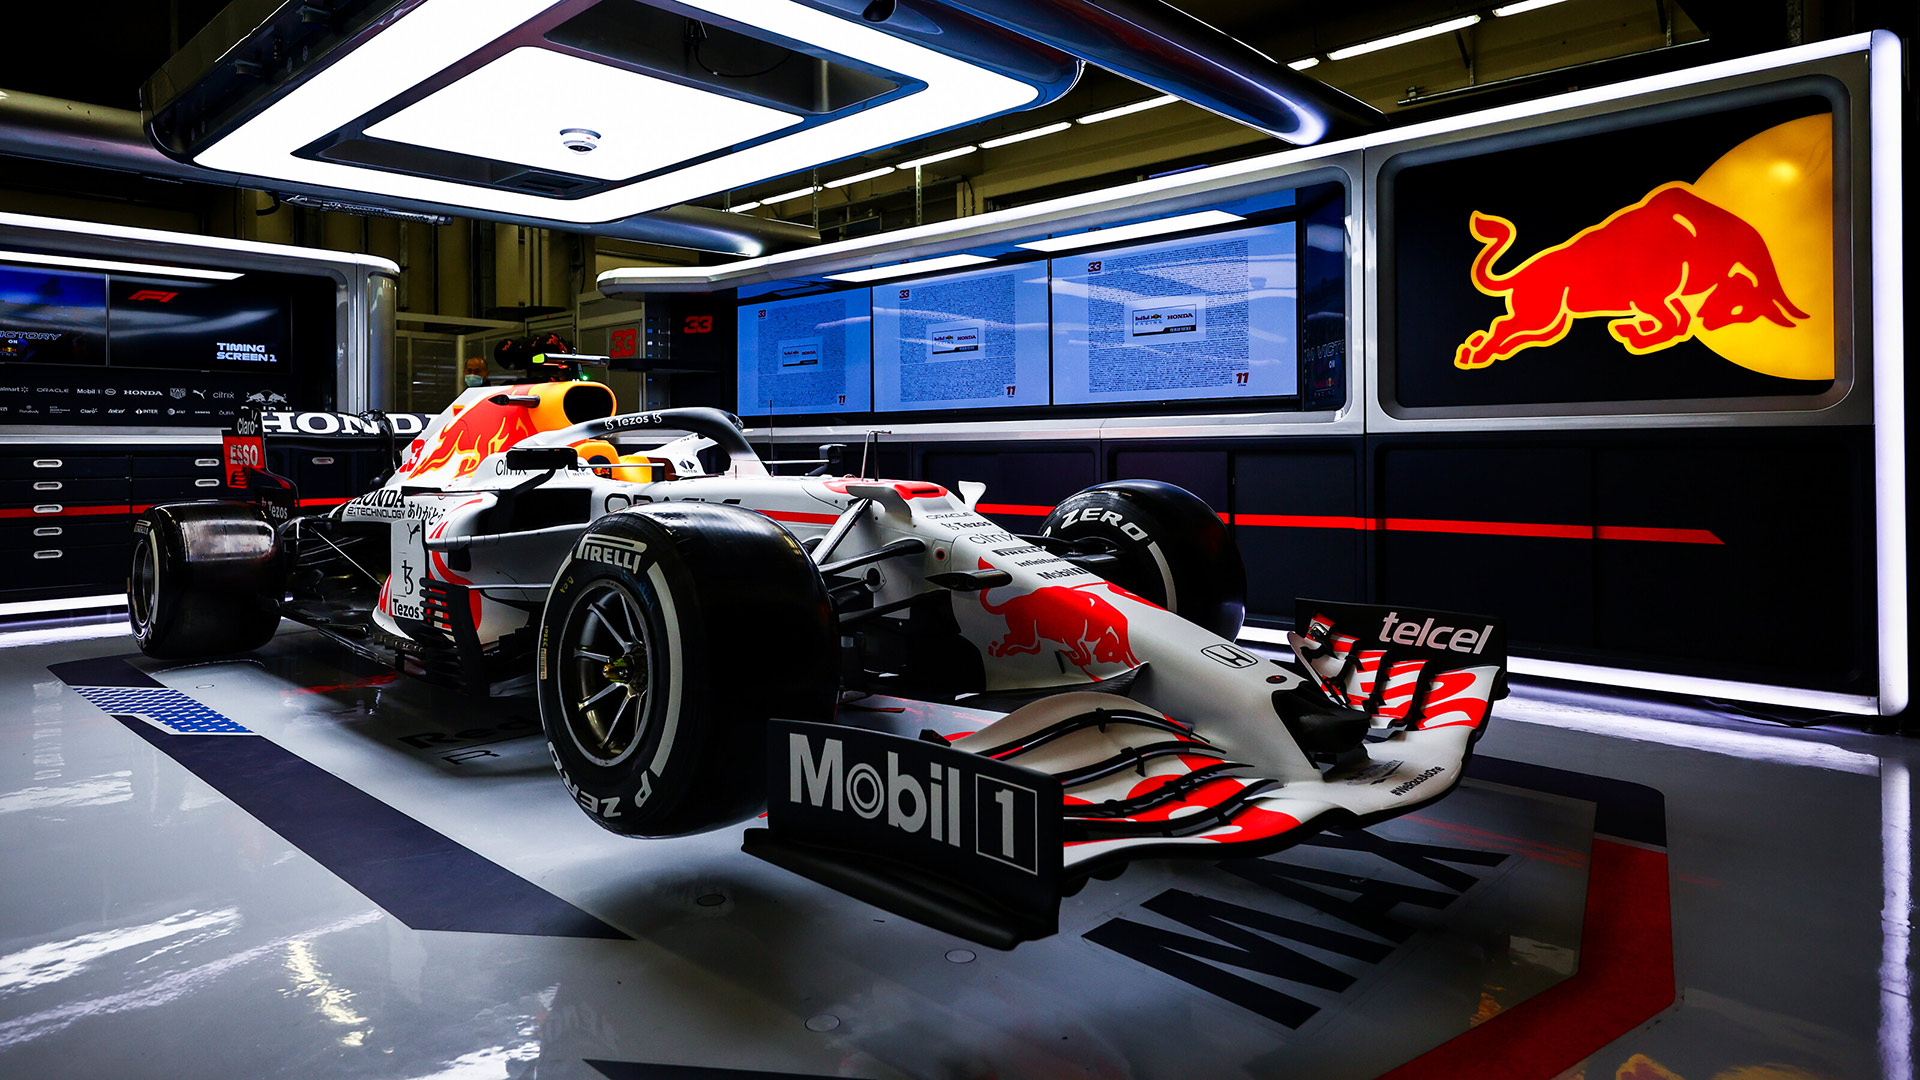 REVEALED: Check out Red Bull's Honda tribute livery for the Turkish Grand Prix. Formula 1®